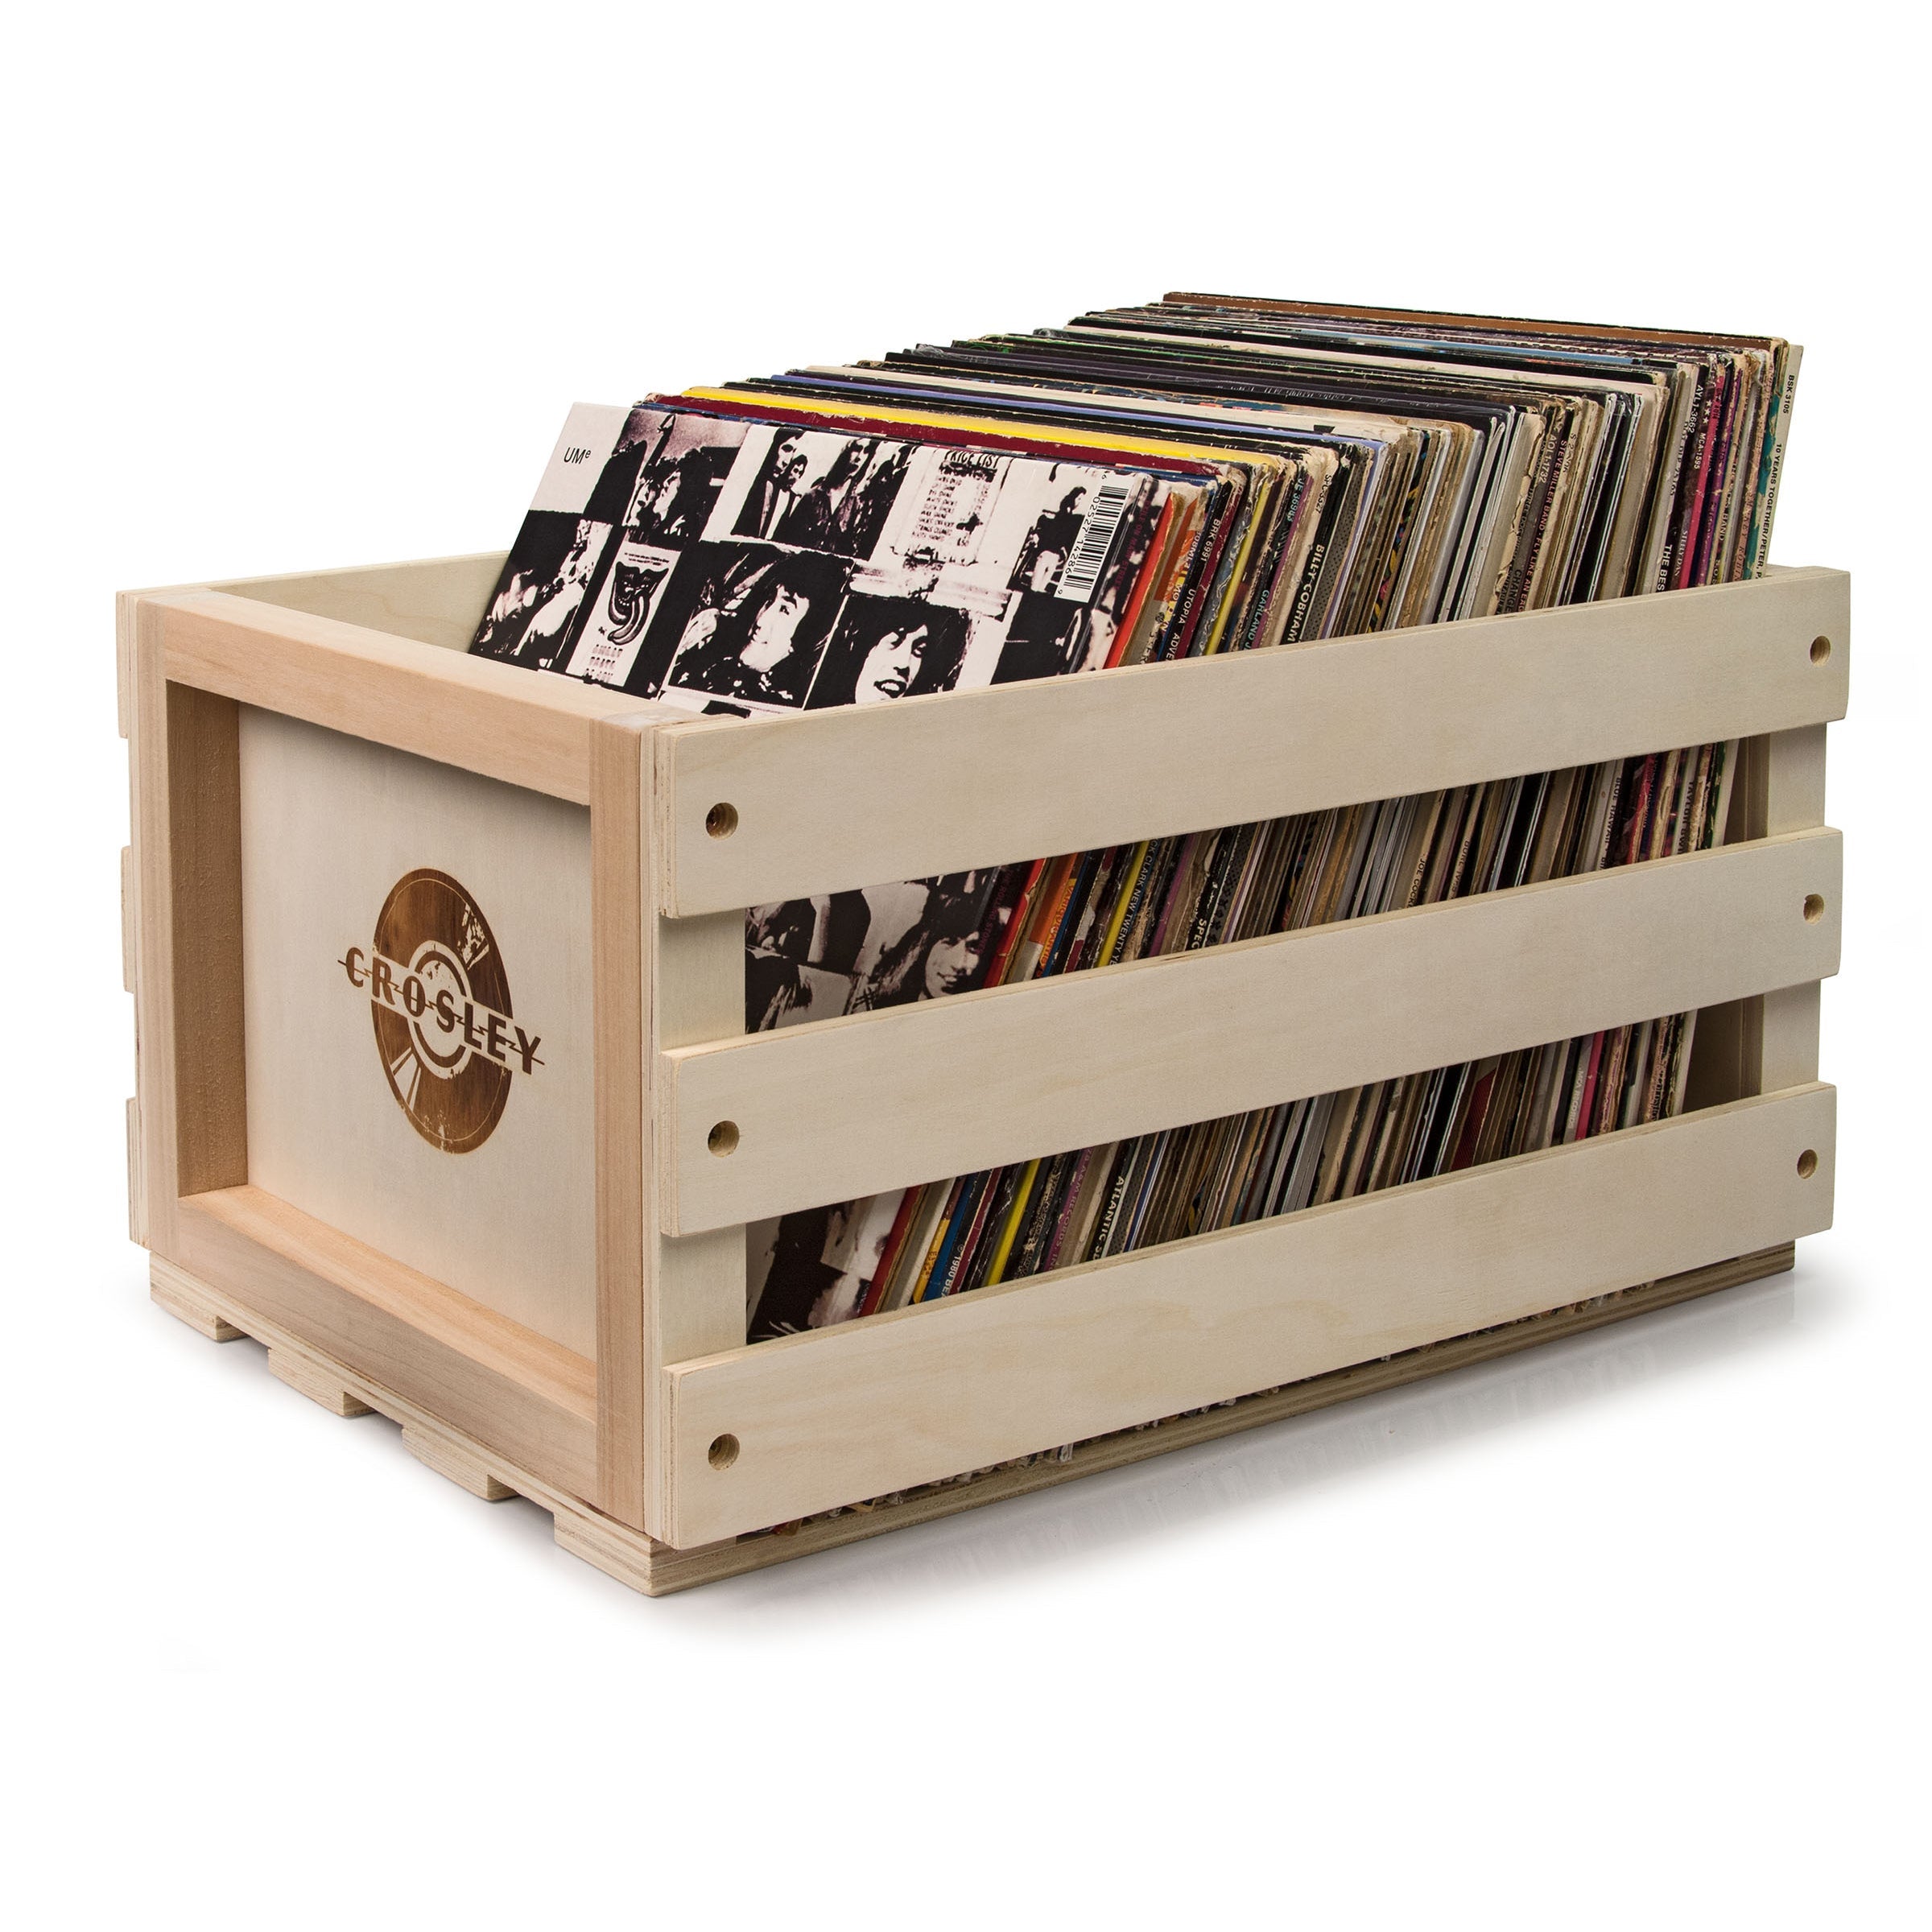 Bluetooth Portable Turntable with Storage Crate - Crosley